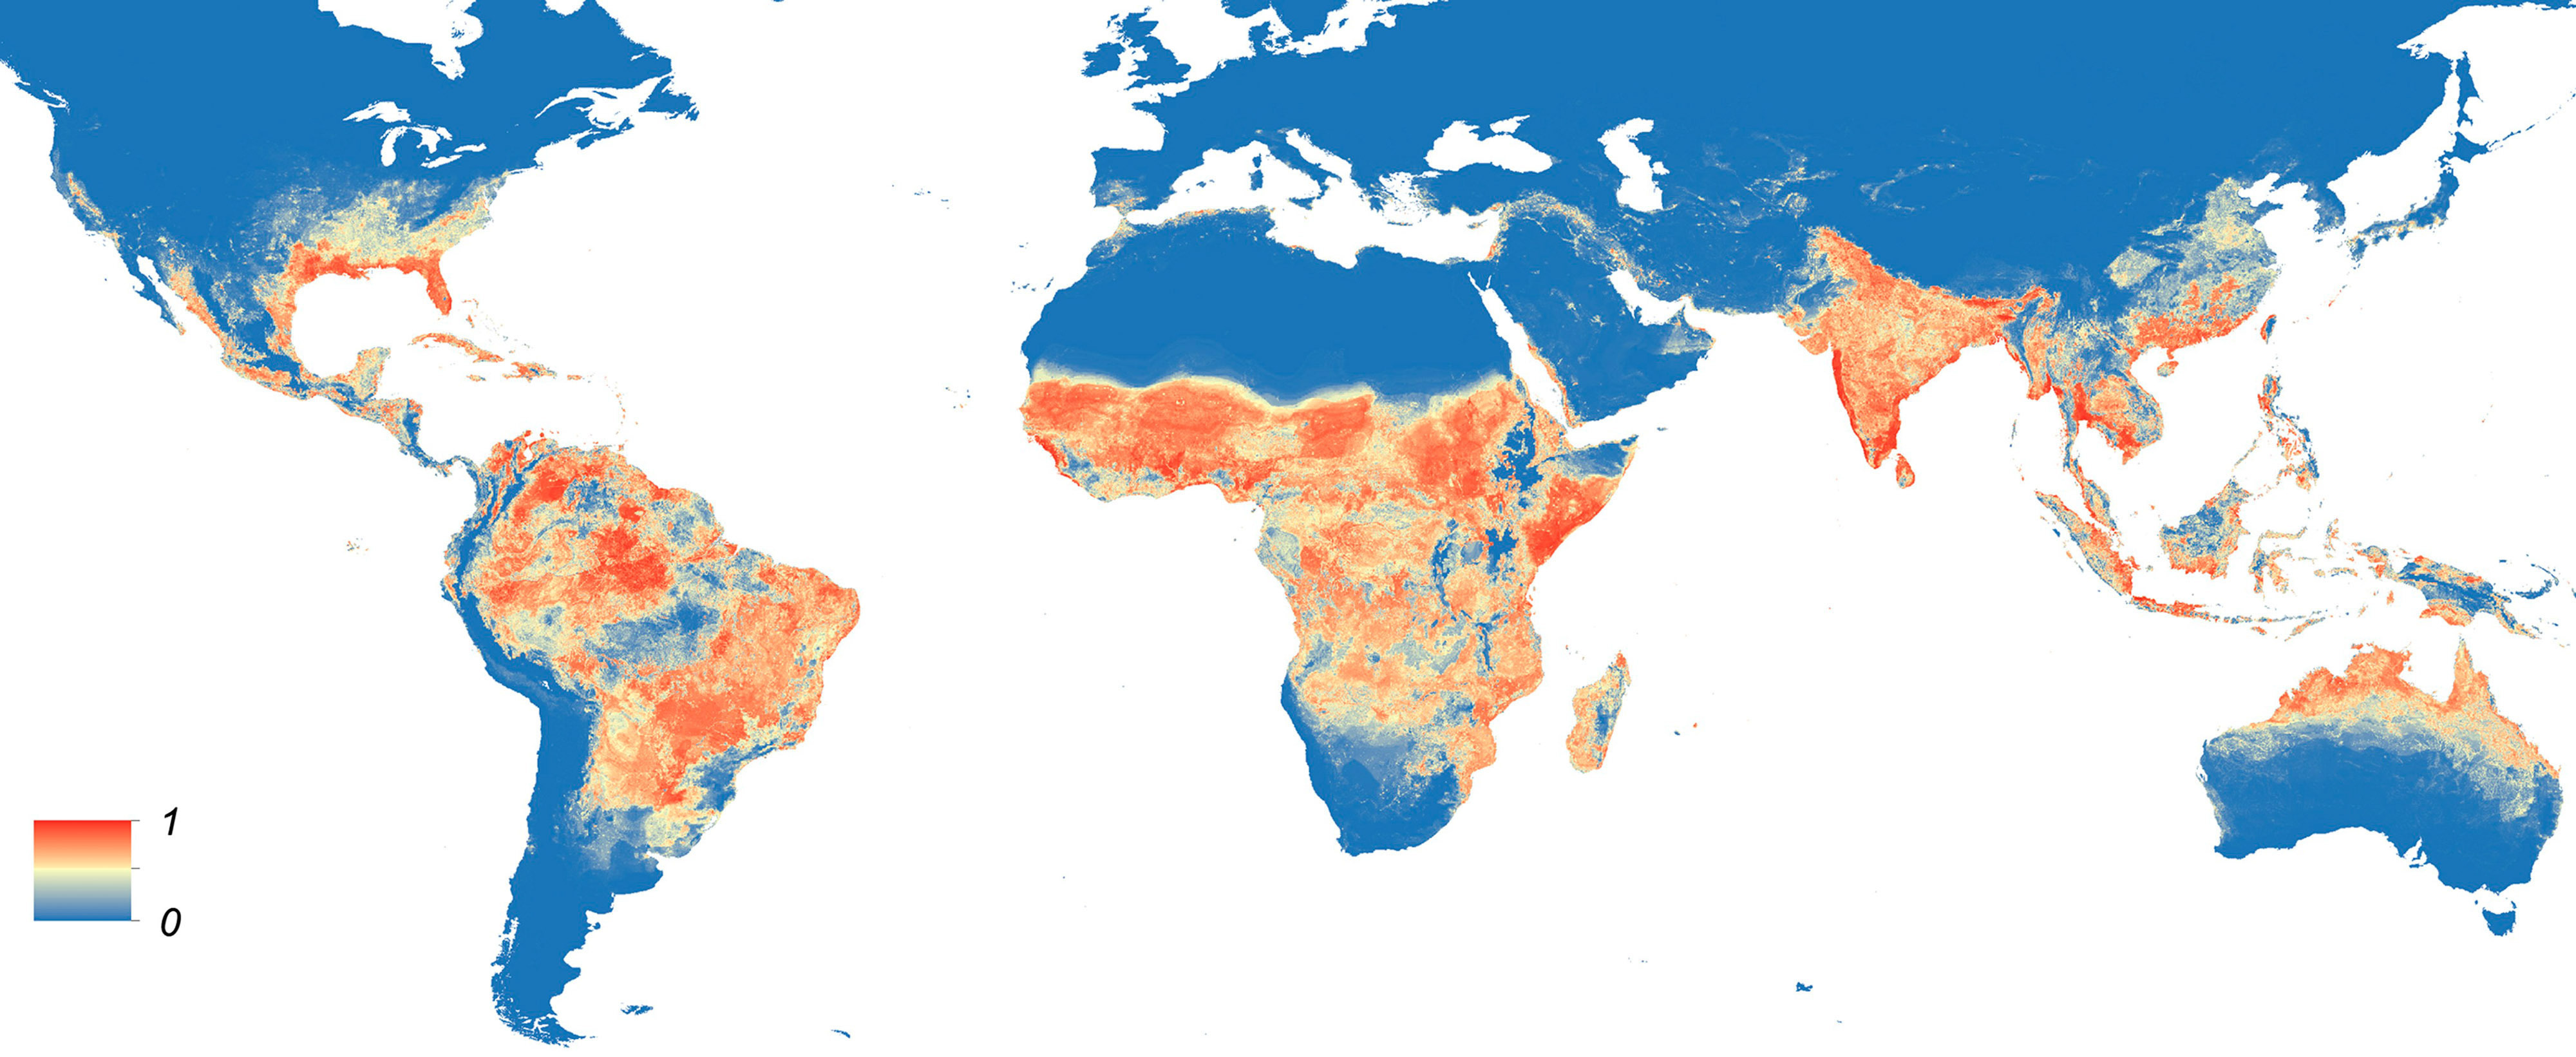 This map shows the predicted distribution of Aedis aegypti, the mosquito that carries Zika virus